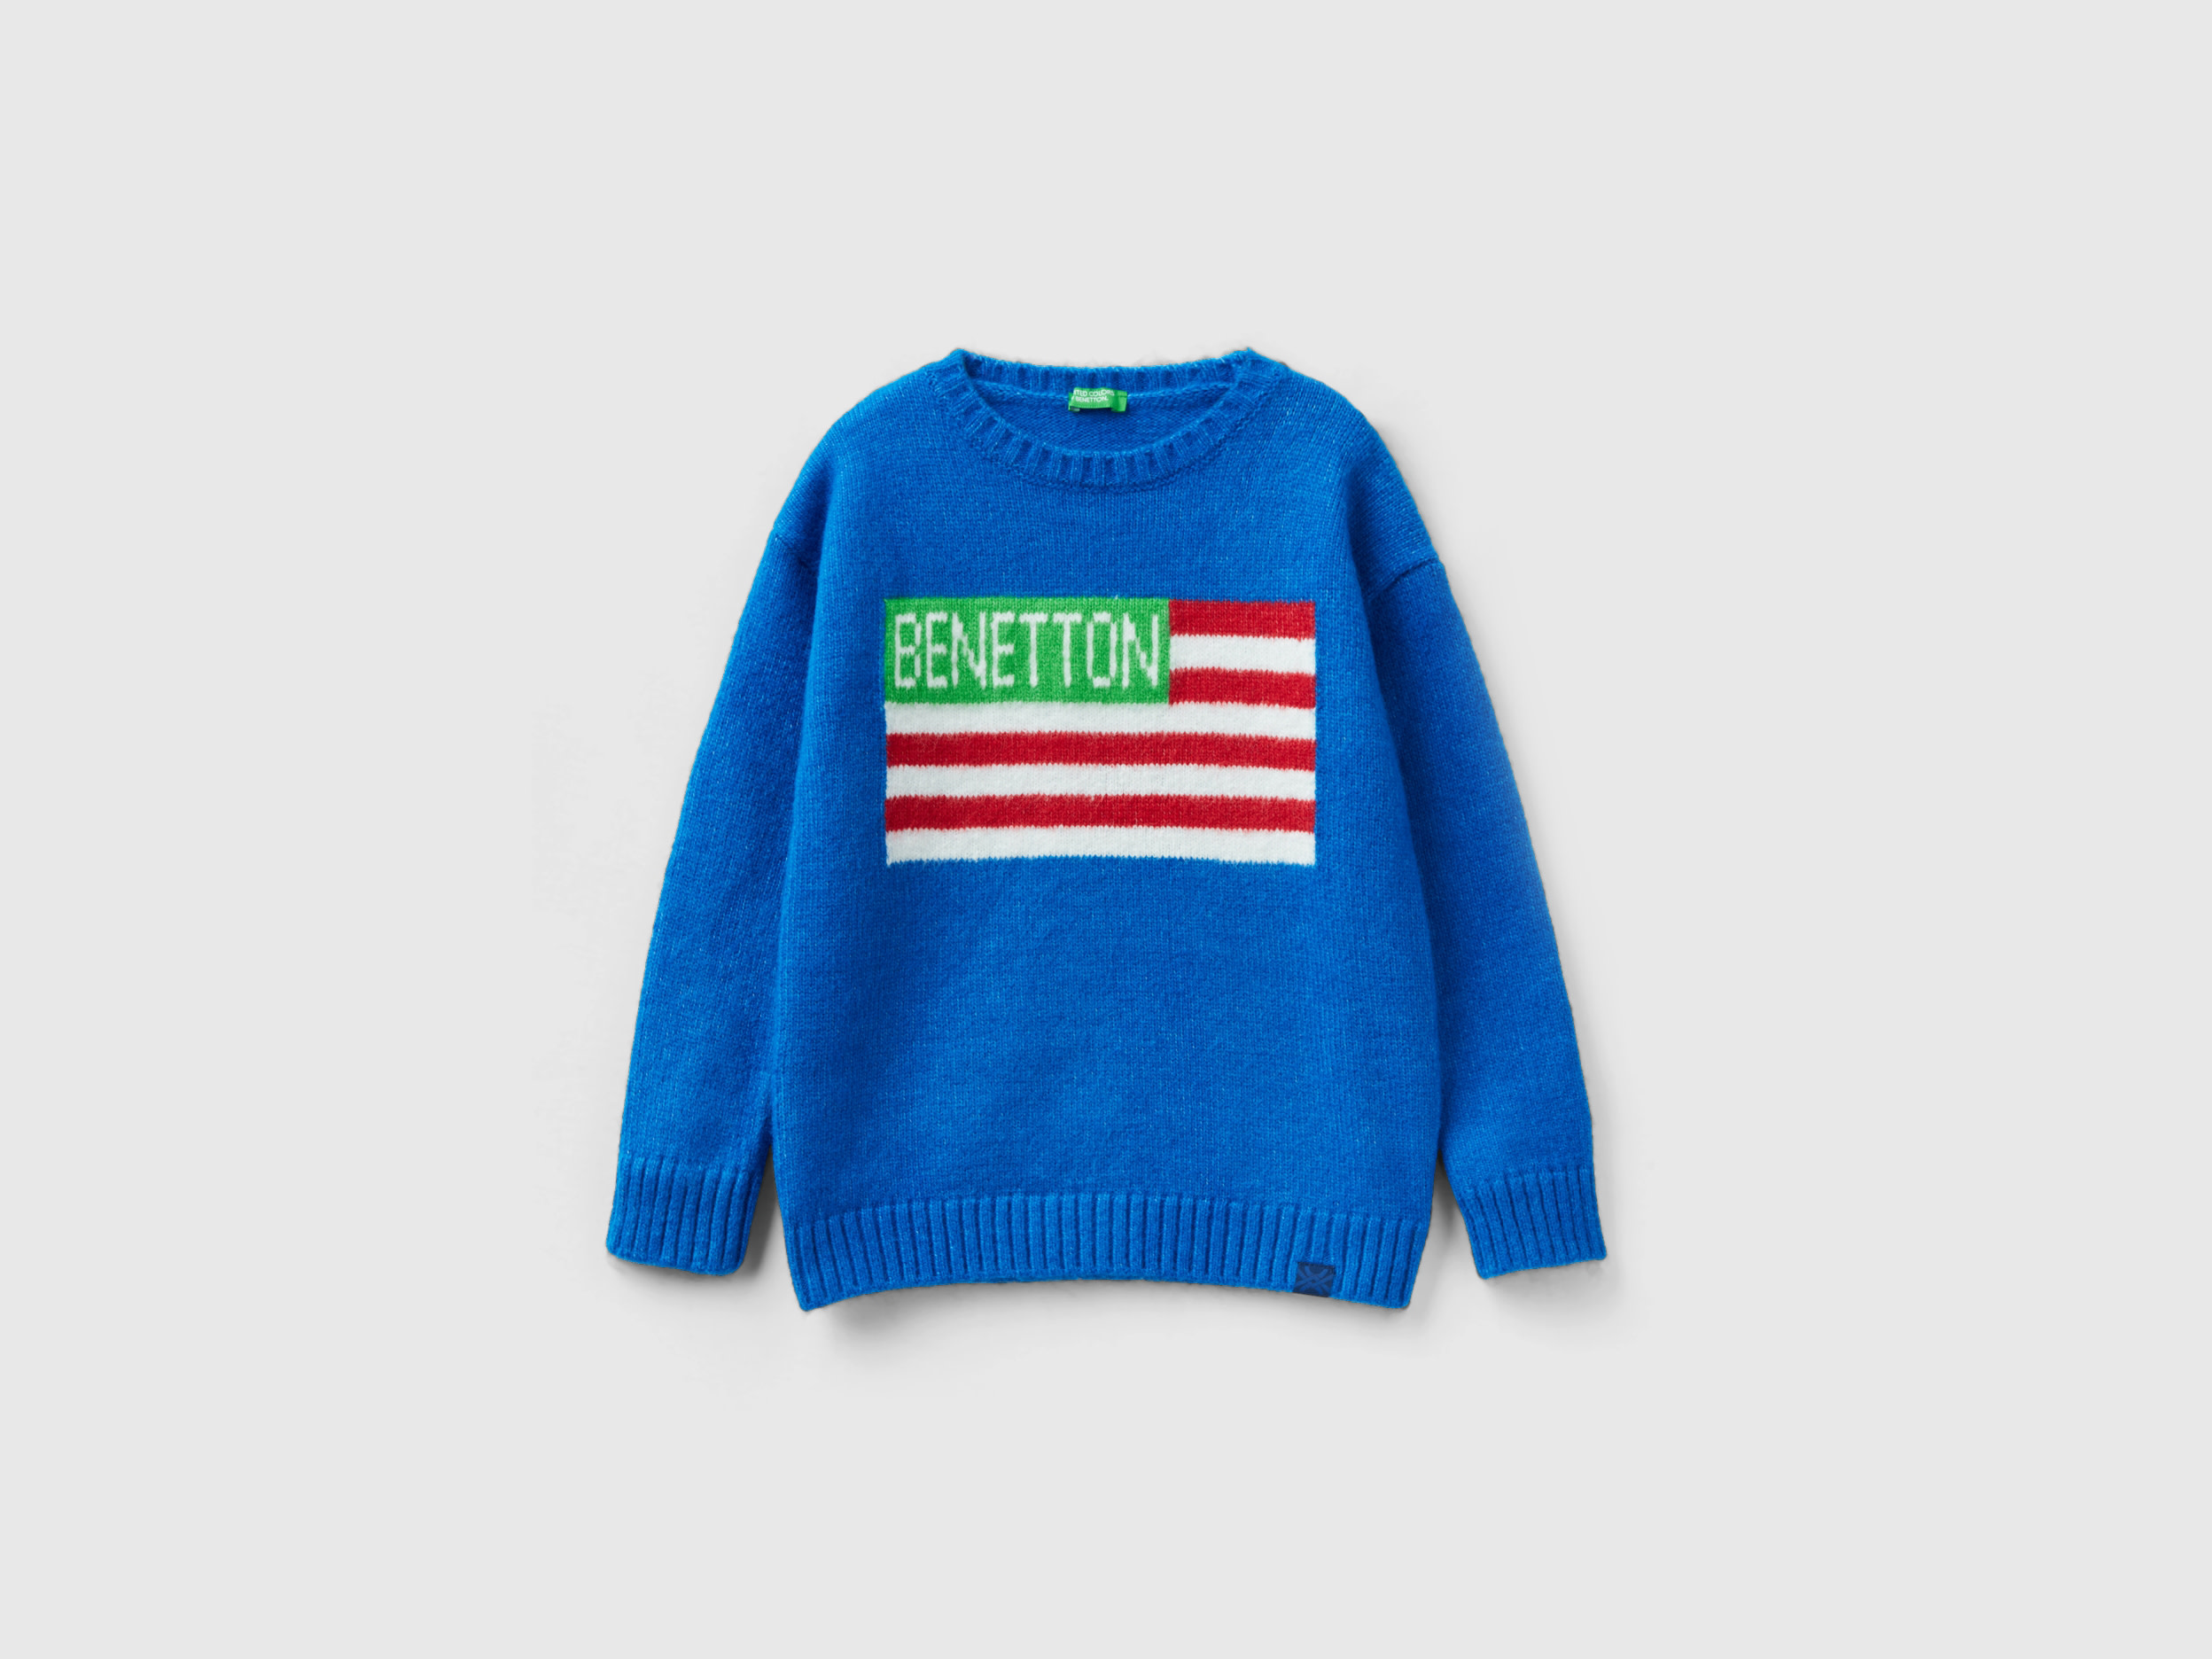 Benetton, Sweater With Flag Inlay, size 3XL, Bright Blue, Kids